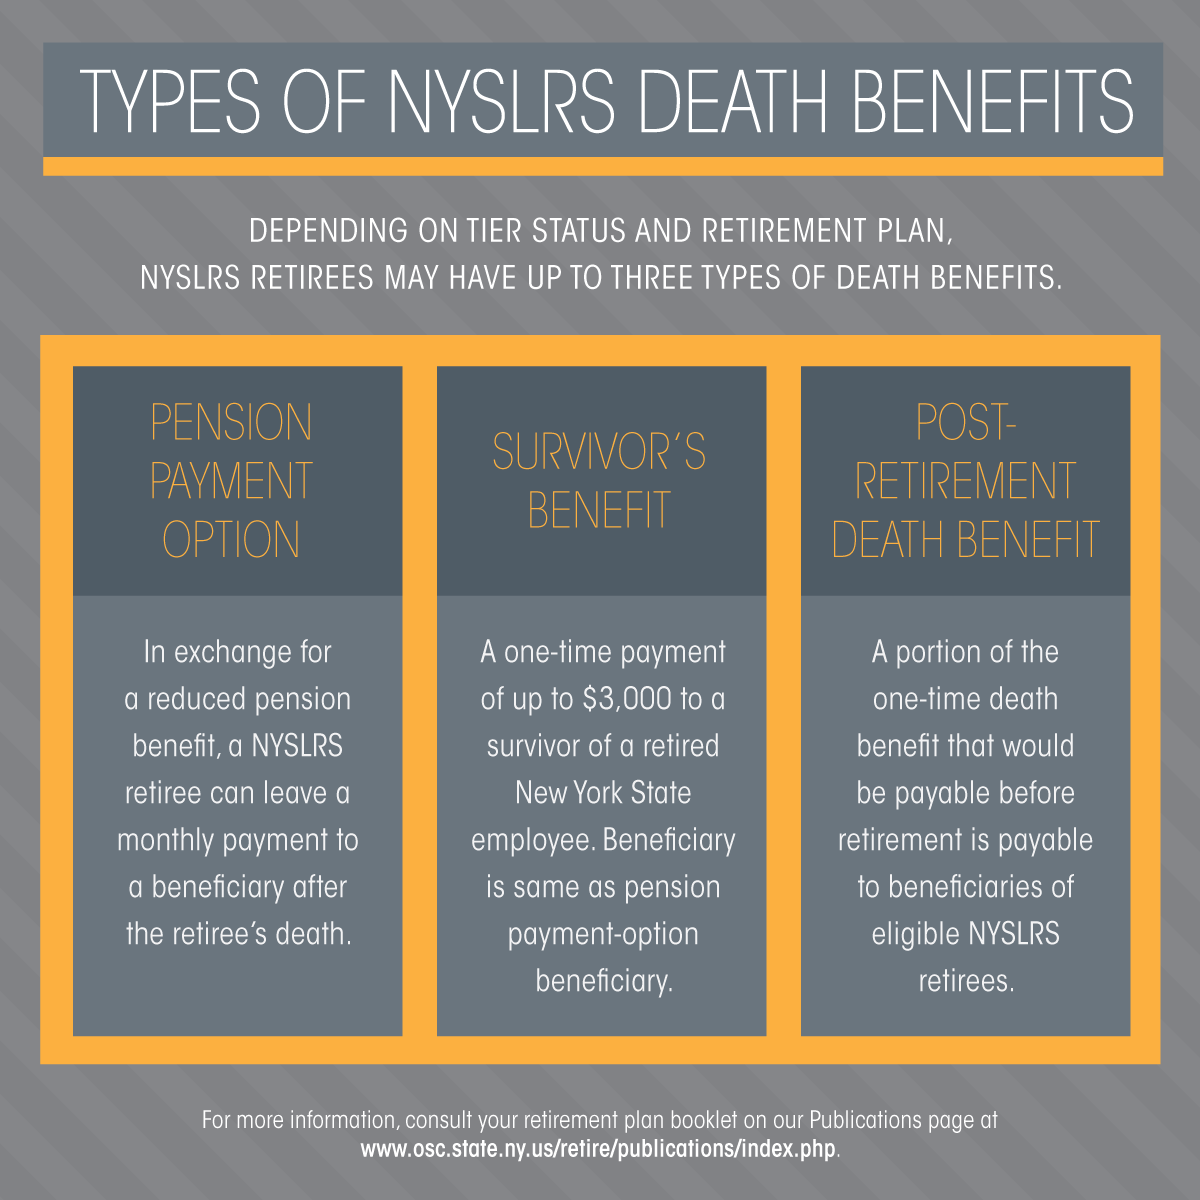 NYSLRS retirees may have up to three types of death benefits that could provide a benefit for a beneficiary: pension payment option, survivor's benefit, and post-retirement death benefit.